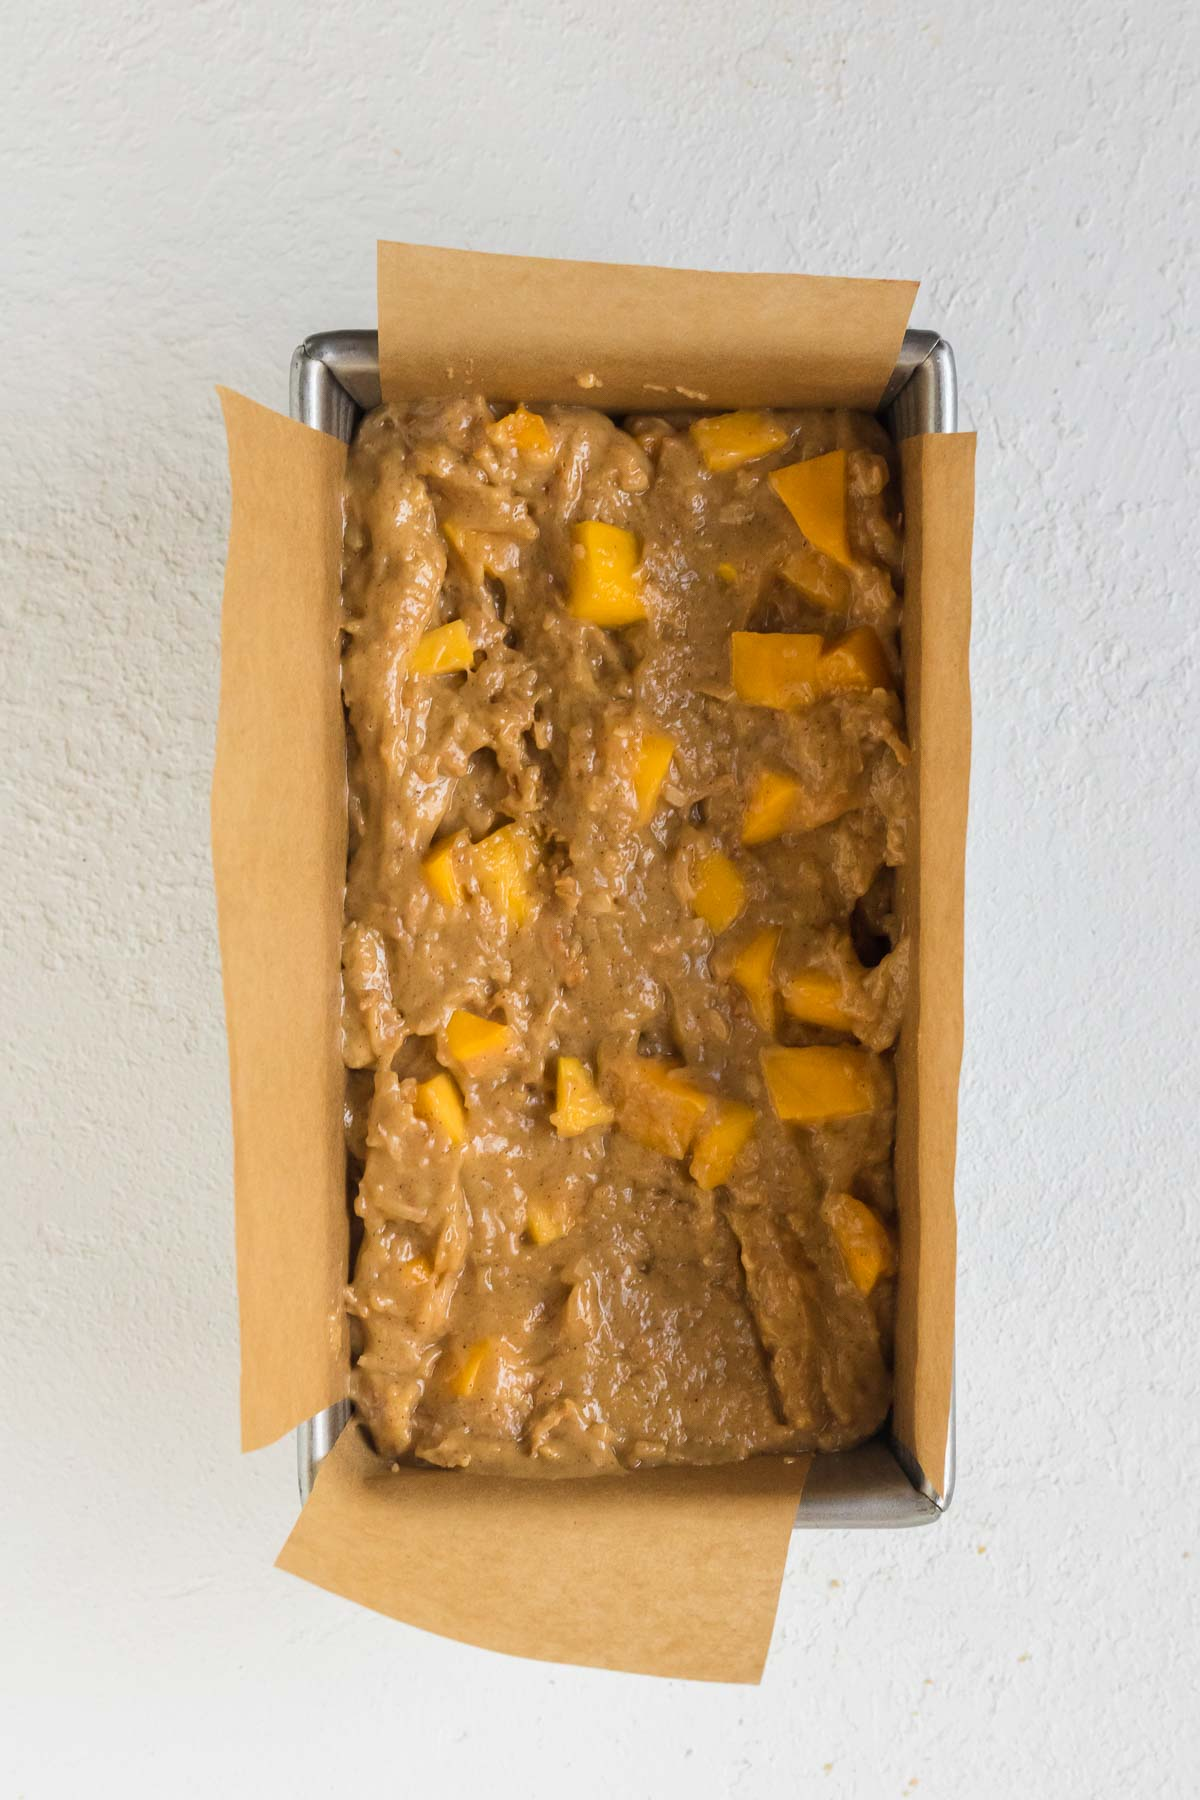 unbaked mango bread batter into the prepared pan